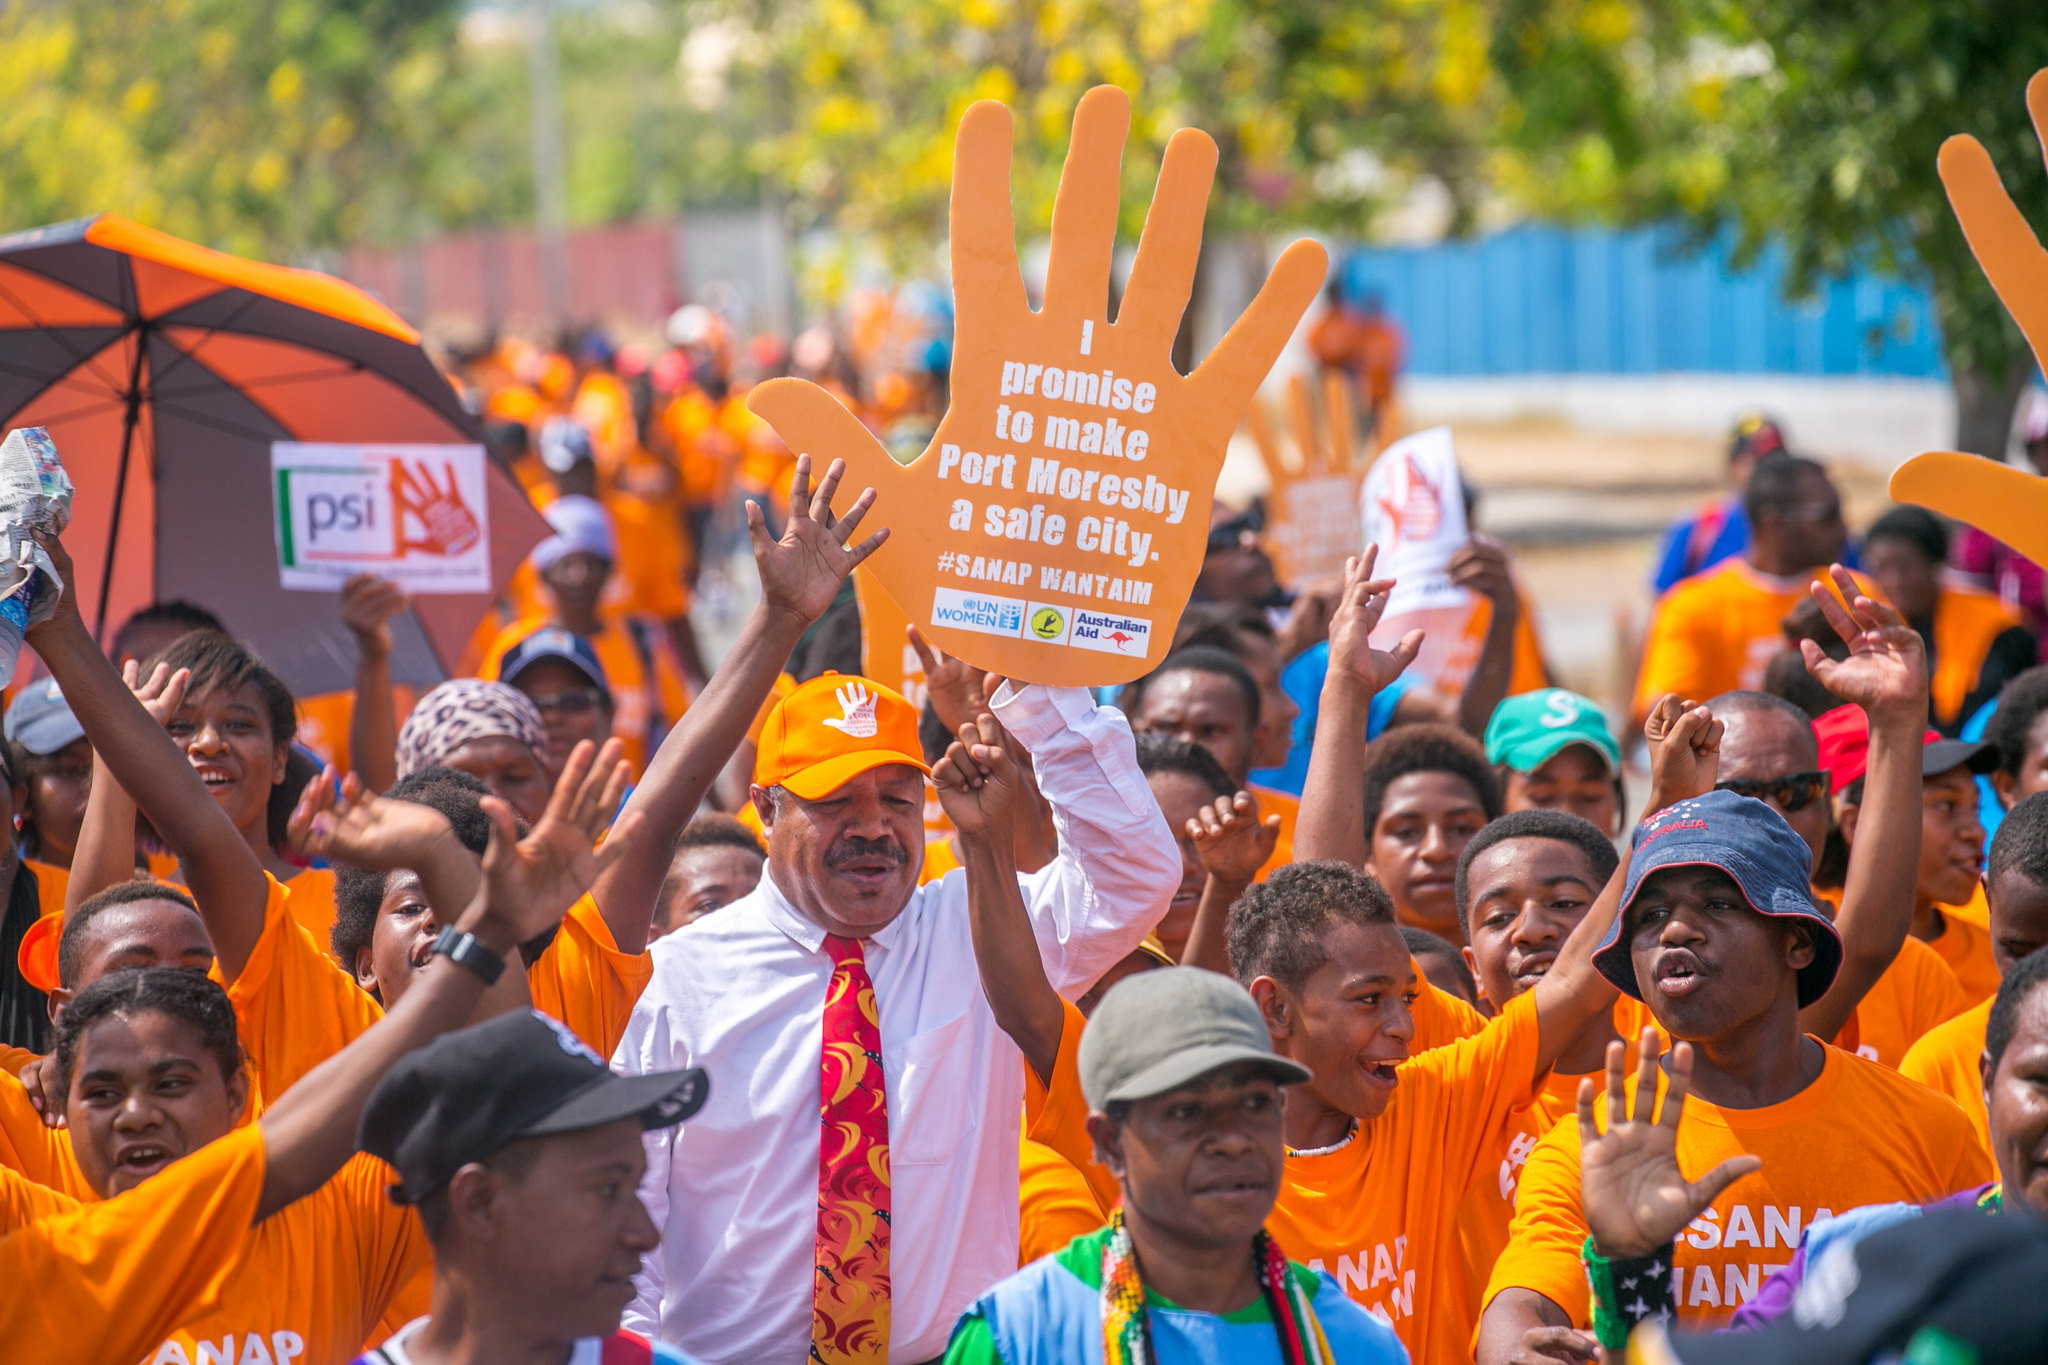 Increasingly, PNG leaders and citizens are standing up against domestic violence (Johaness Terra/UN Women/CC BY-NC-ND 2.0)